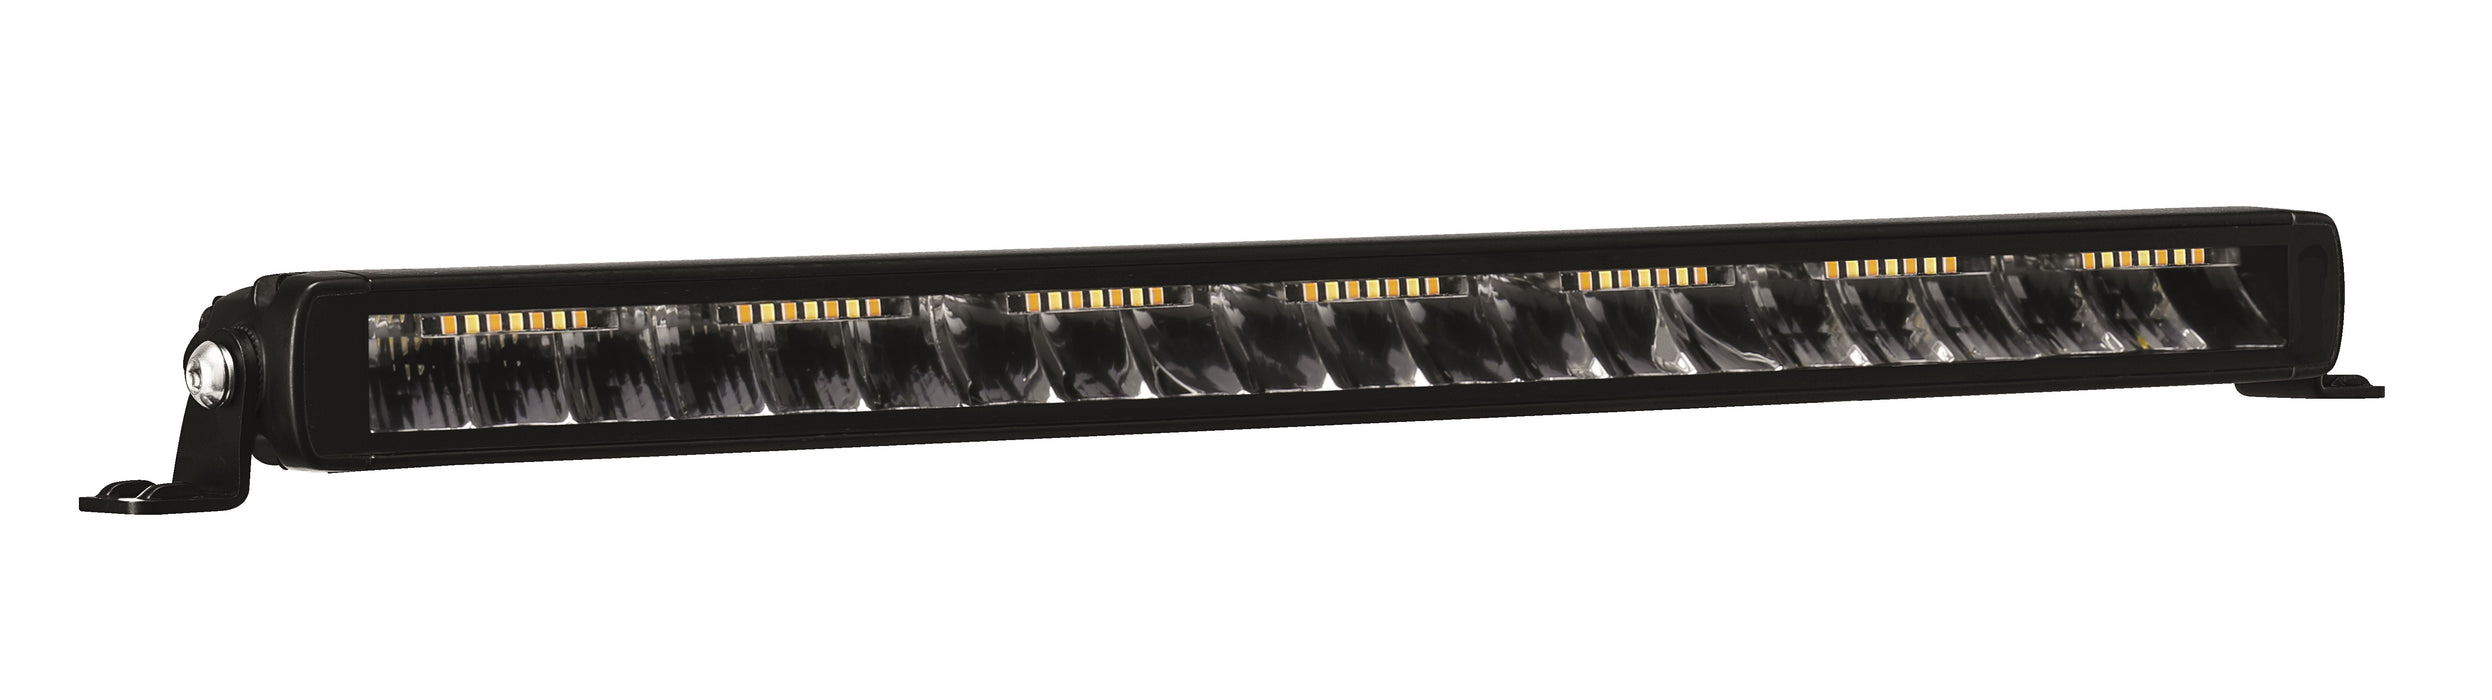 20" COMBO SUPERIOR LUX SERIES SAFETY LED BARS